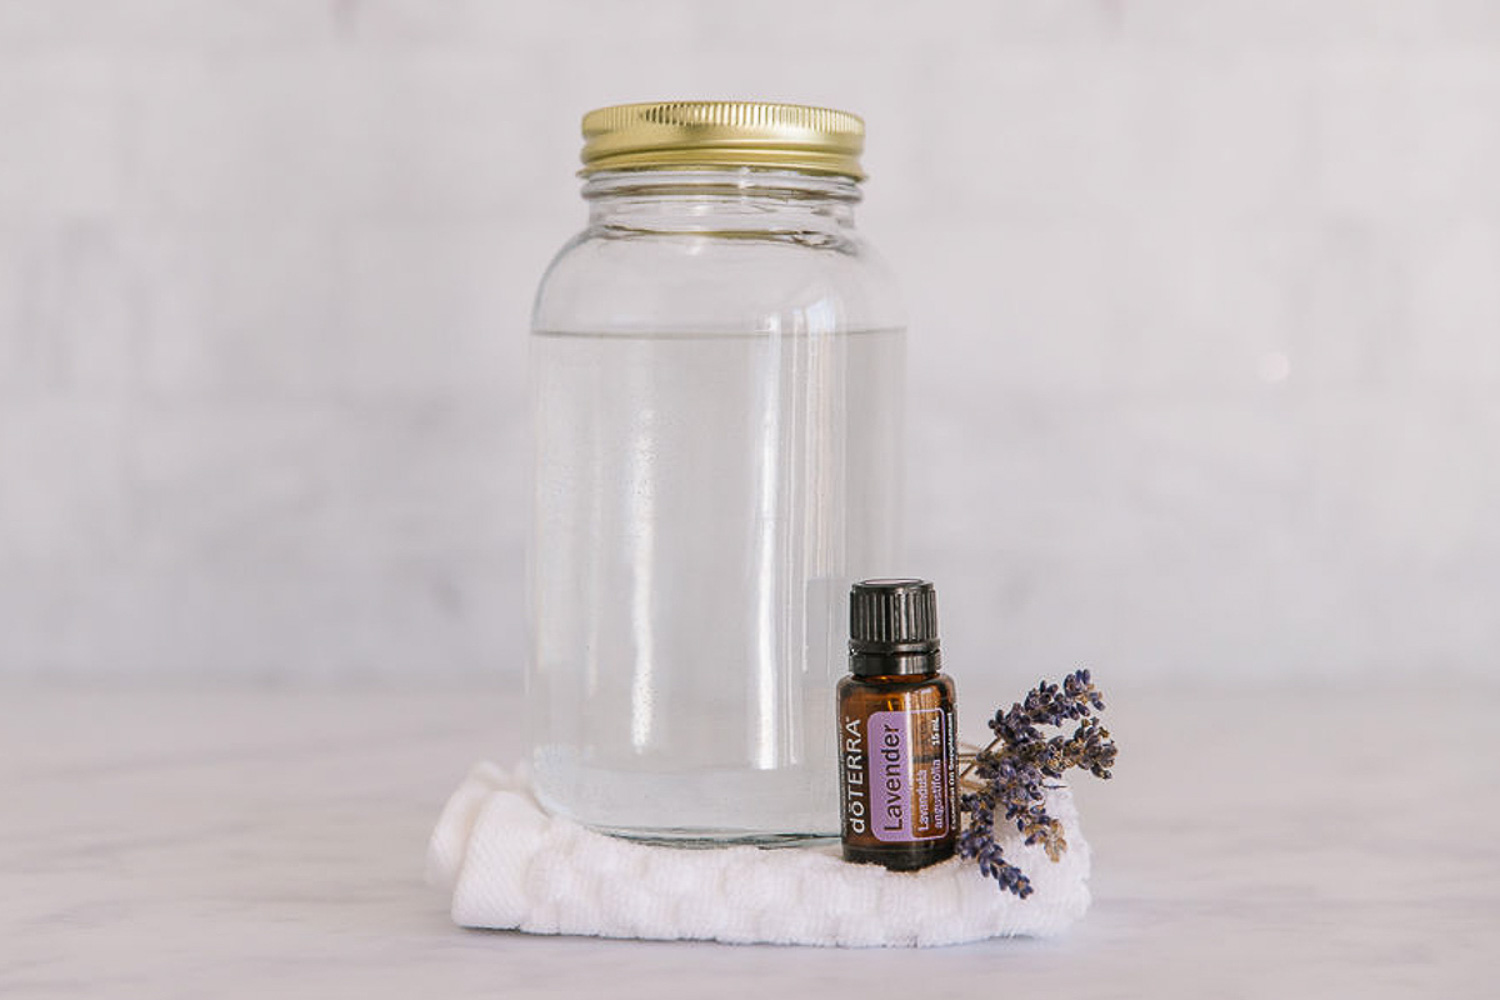 A clear mason jar filled with vinegar on top of a white towel with a bottle of lavender Doterra essential oil and a piece of lavender.